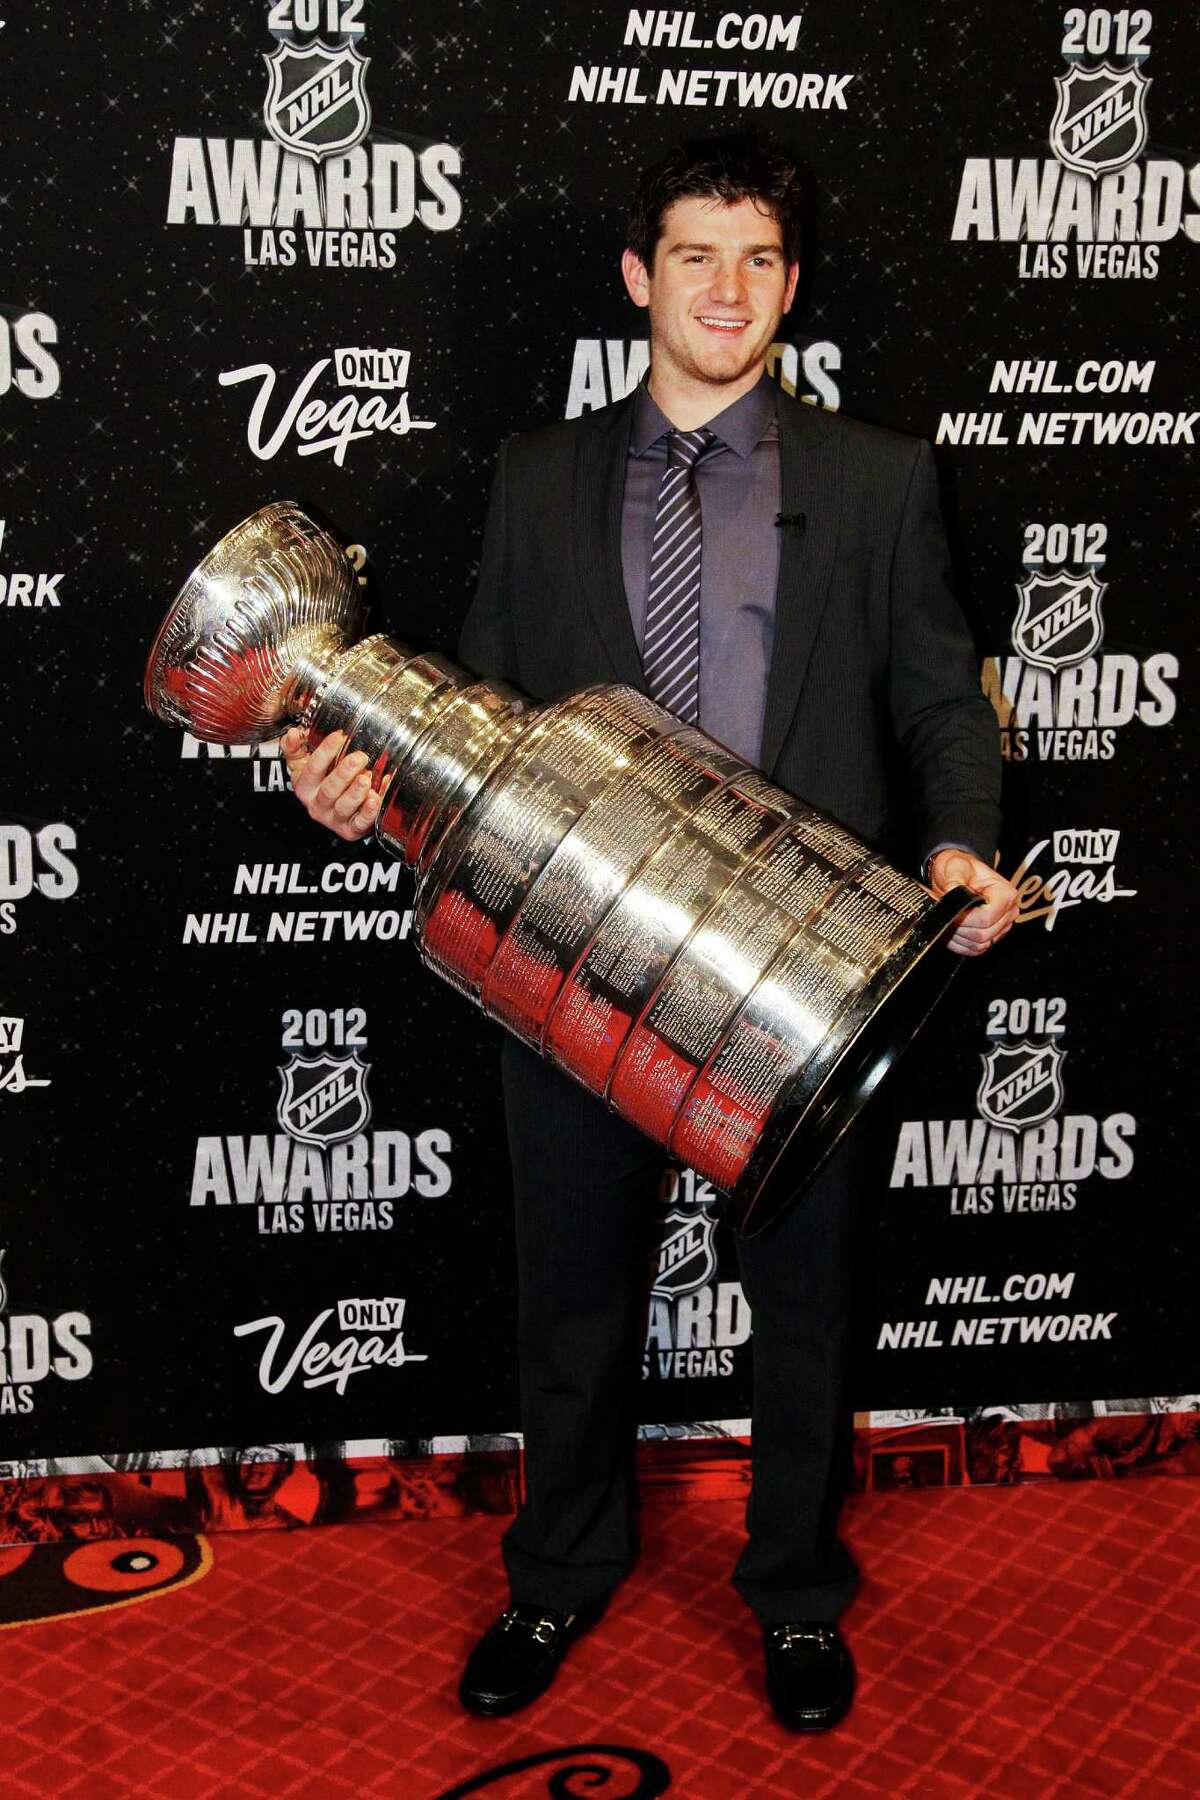 Kings goaltender Jonathan Quick shows off the Stanley Cup at the NHL Awards ceremony in Las Vegas.